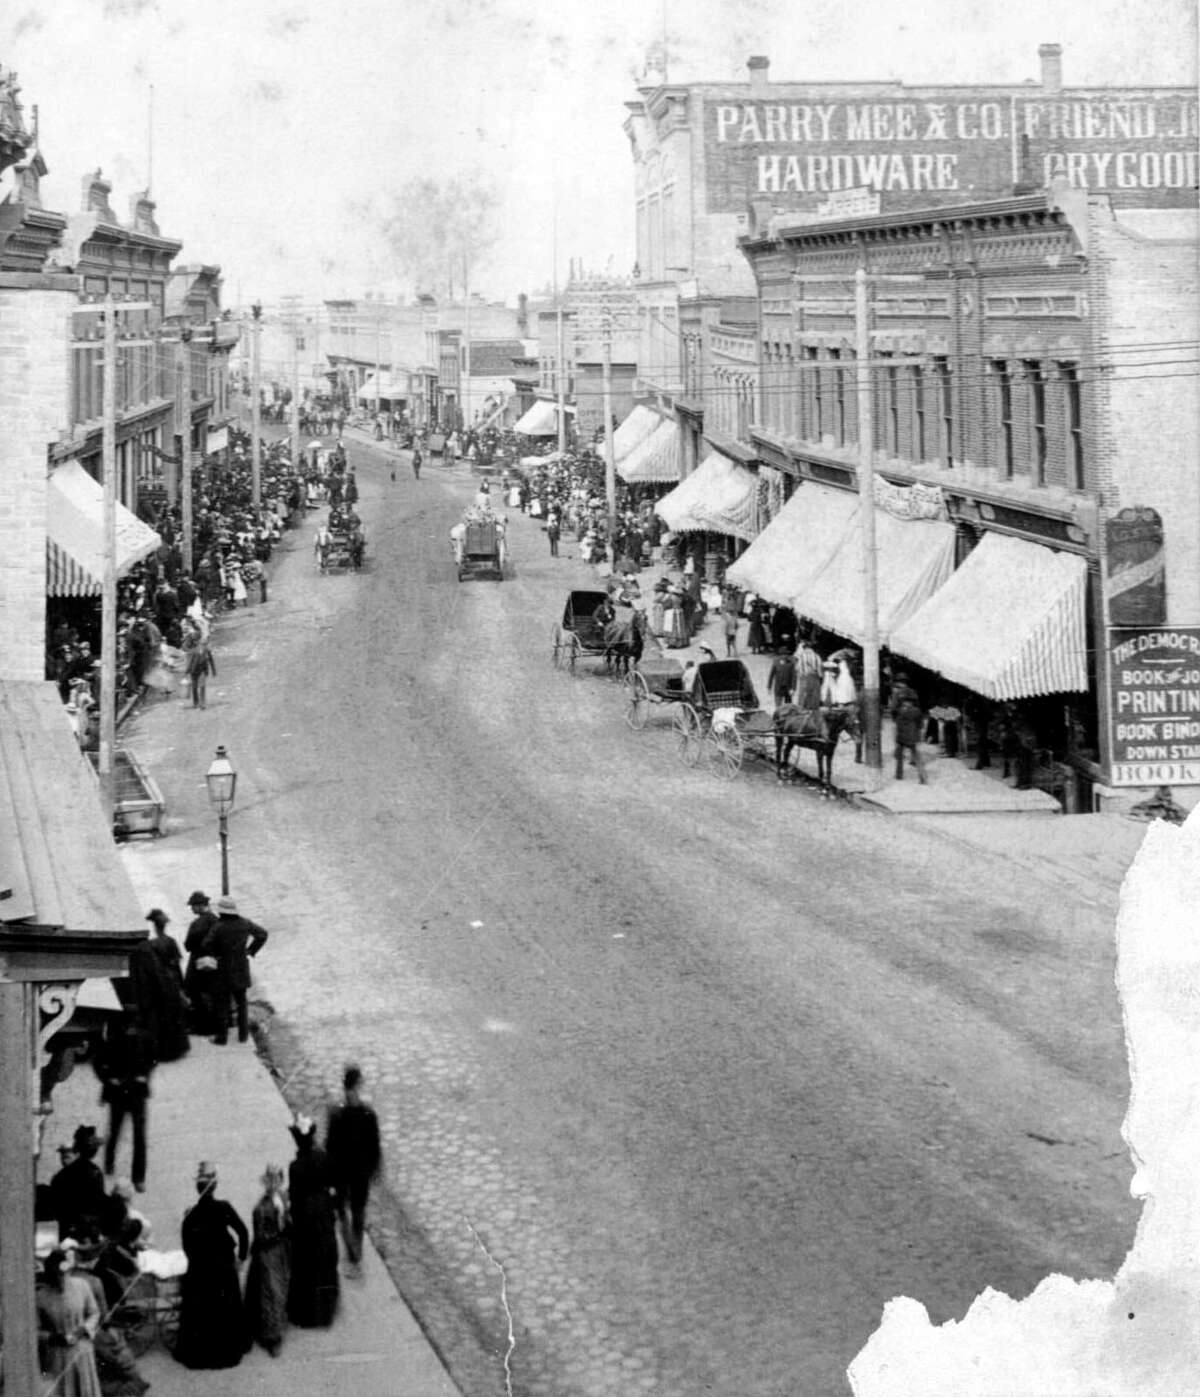 The Manistee River Street area slightly resembles the street that exists today in this 1890s photograph.